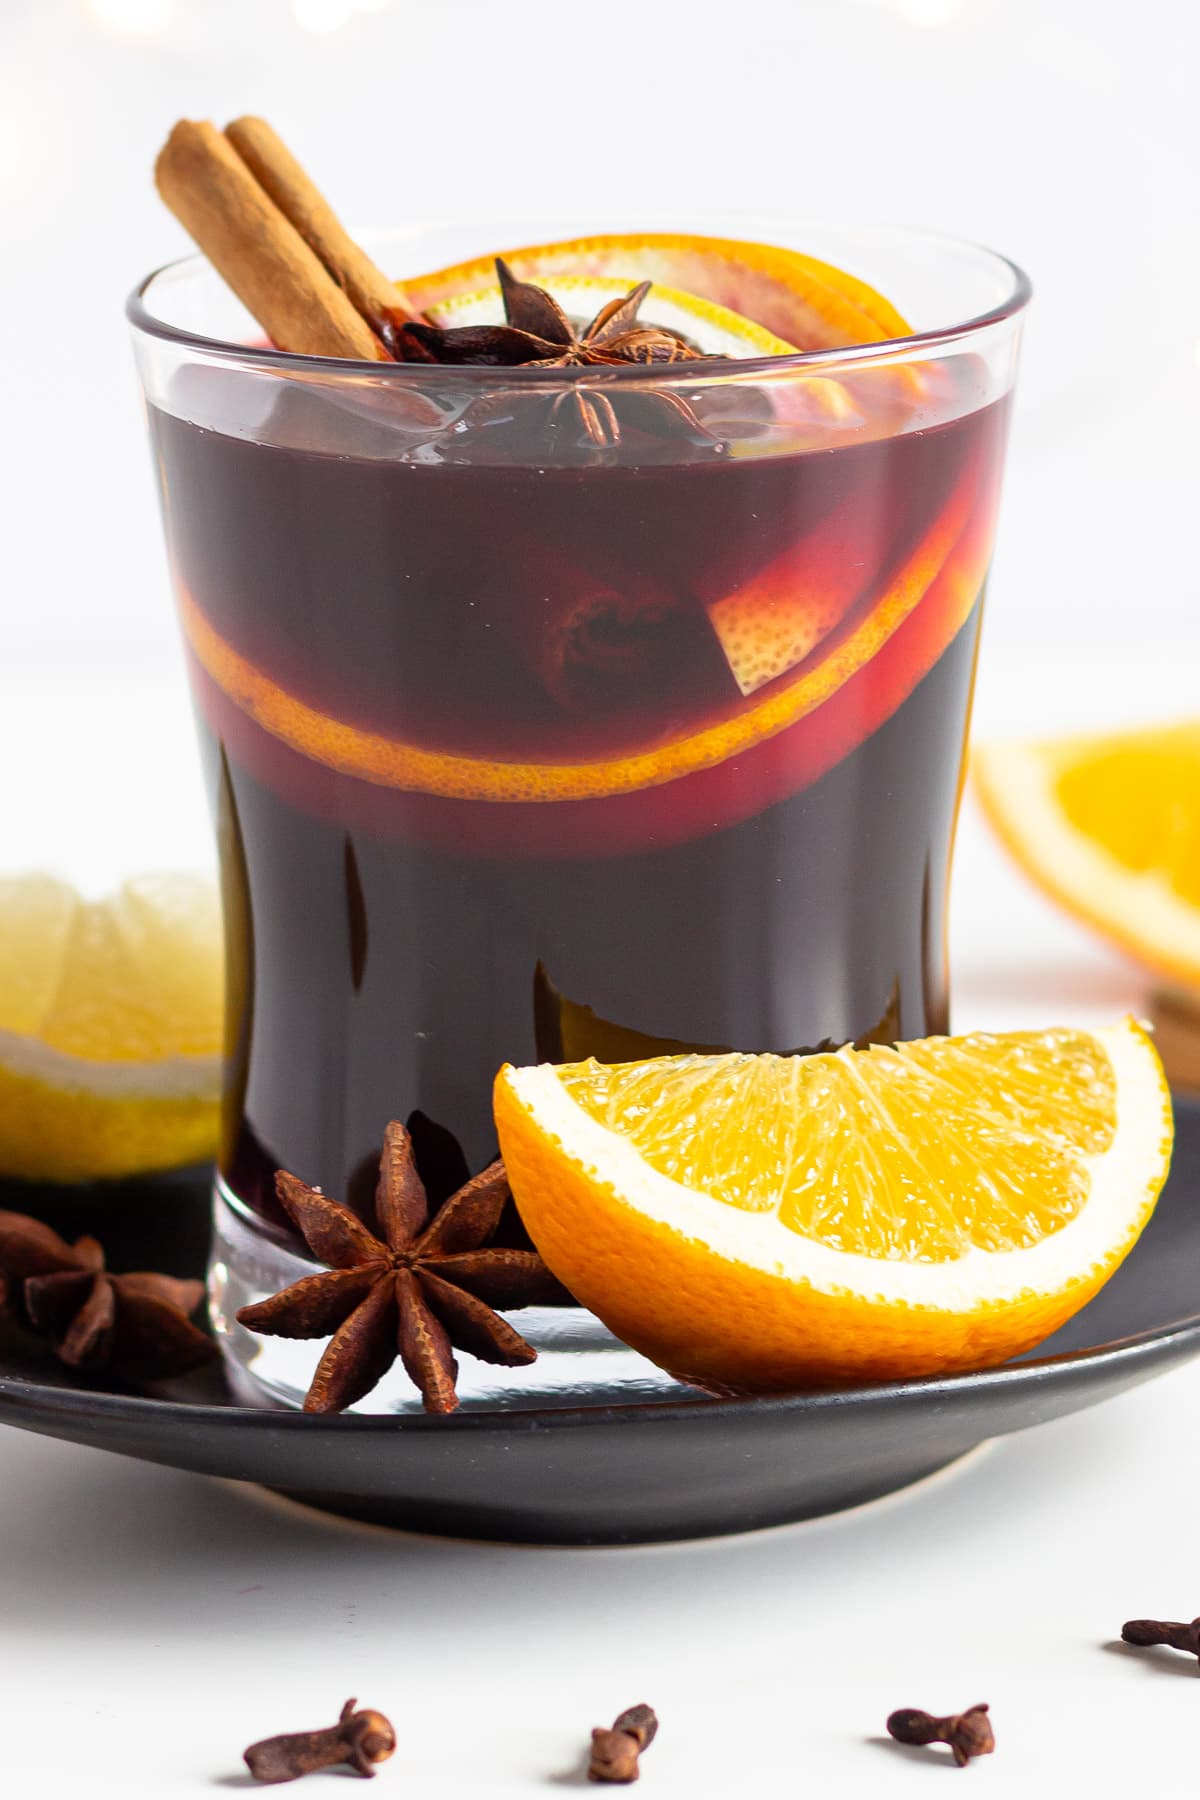 Glass of homemade German mulled wine garnished with orange, lemon, cinnamon sticks, star anise and cloves.